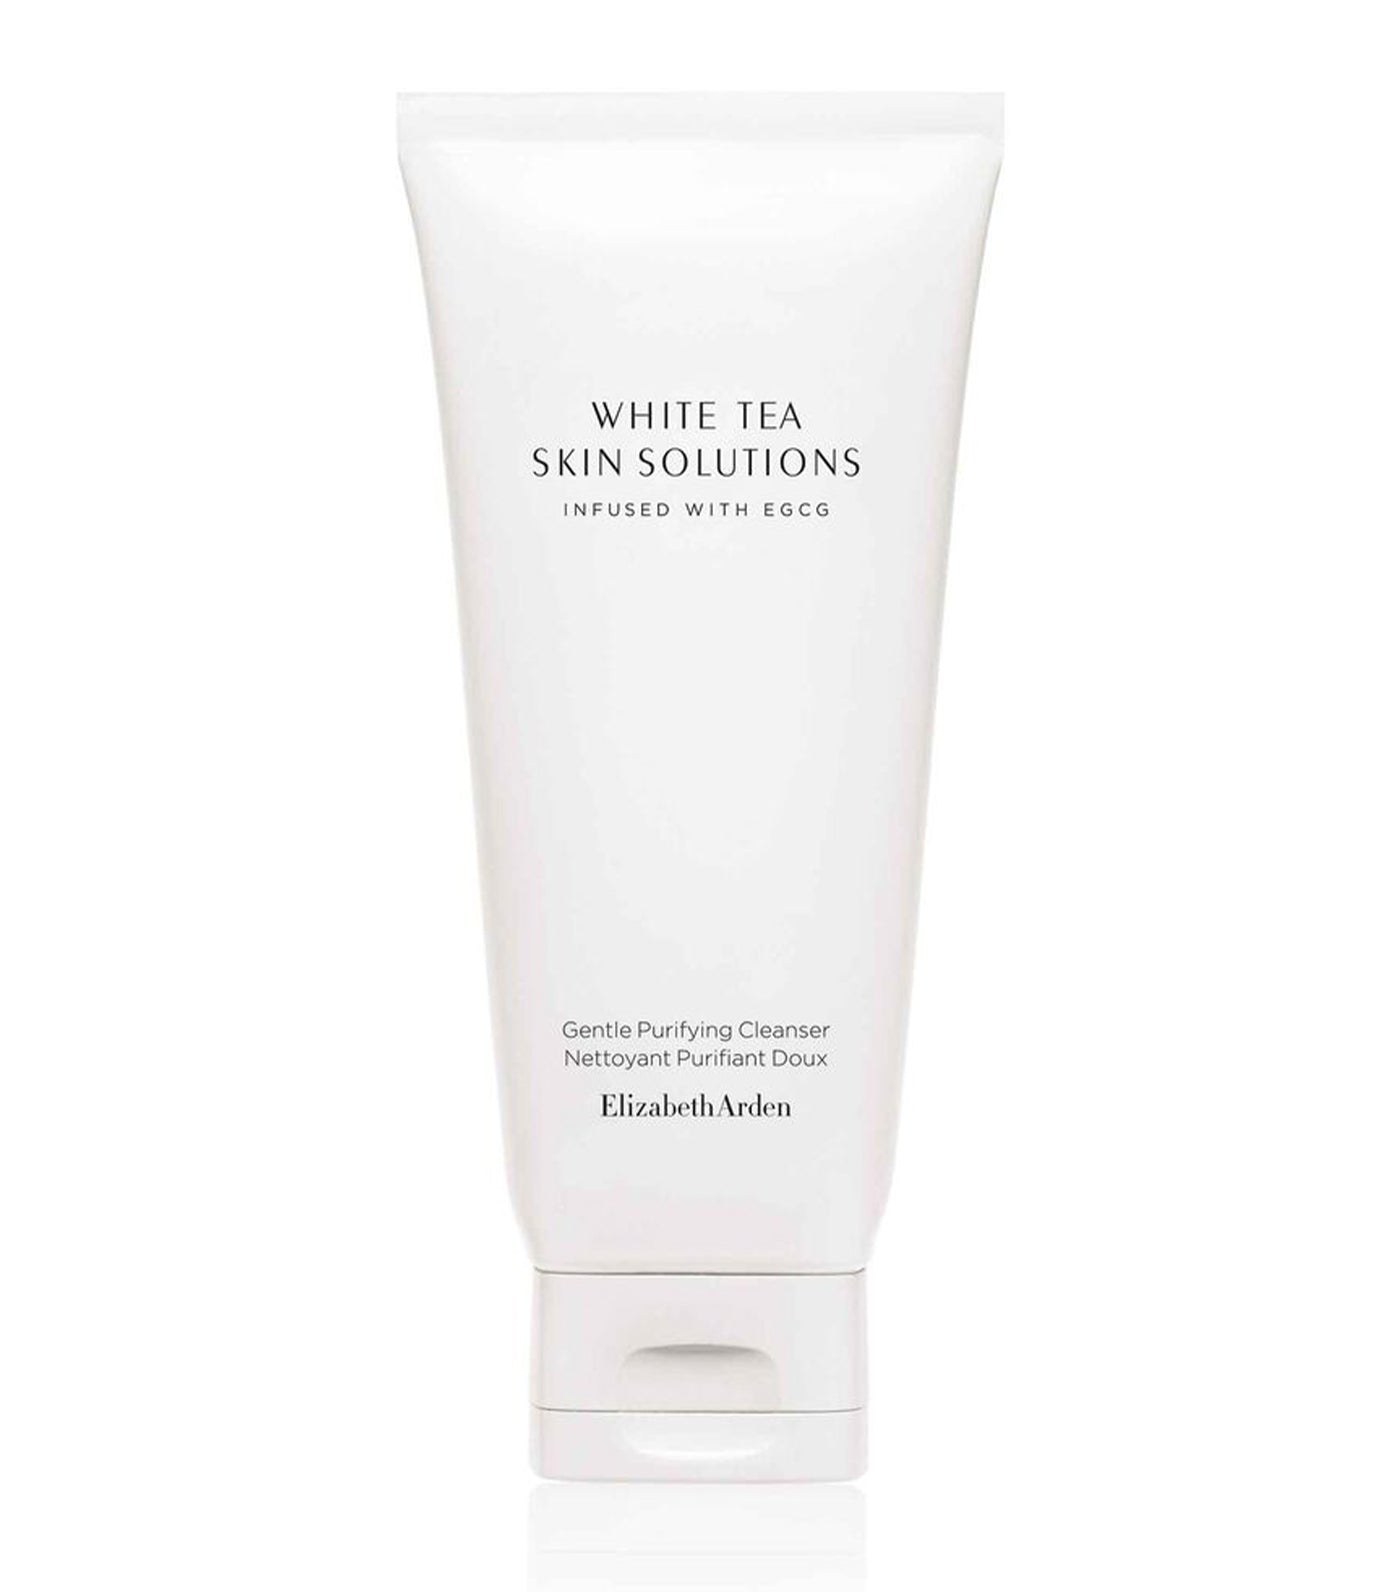 White Tea Skin Solutions Purifying Cleanser